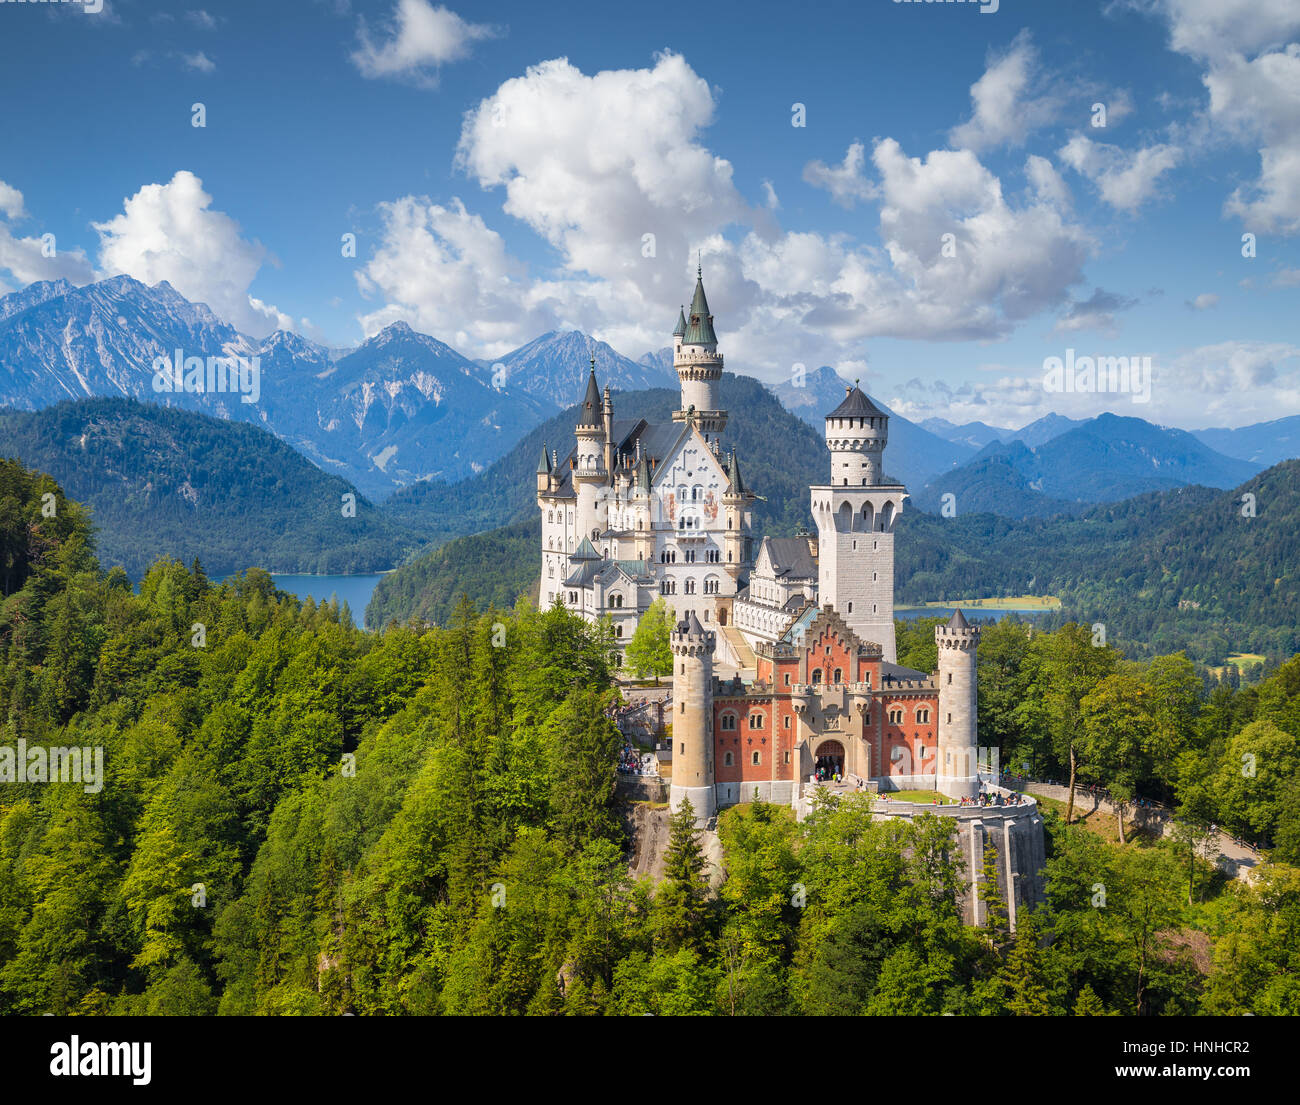 Classic view of famous Neuschwanstein Castle on a beautiful sunny day with blue sky and clouds in summer, town of Fussen, Allgau, Bavaria, Germany Stock Photo